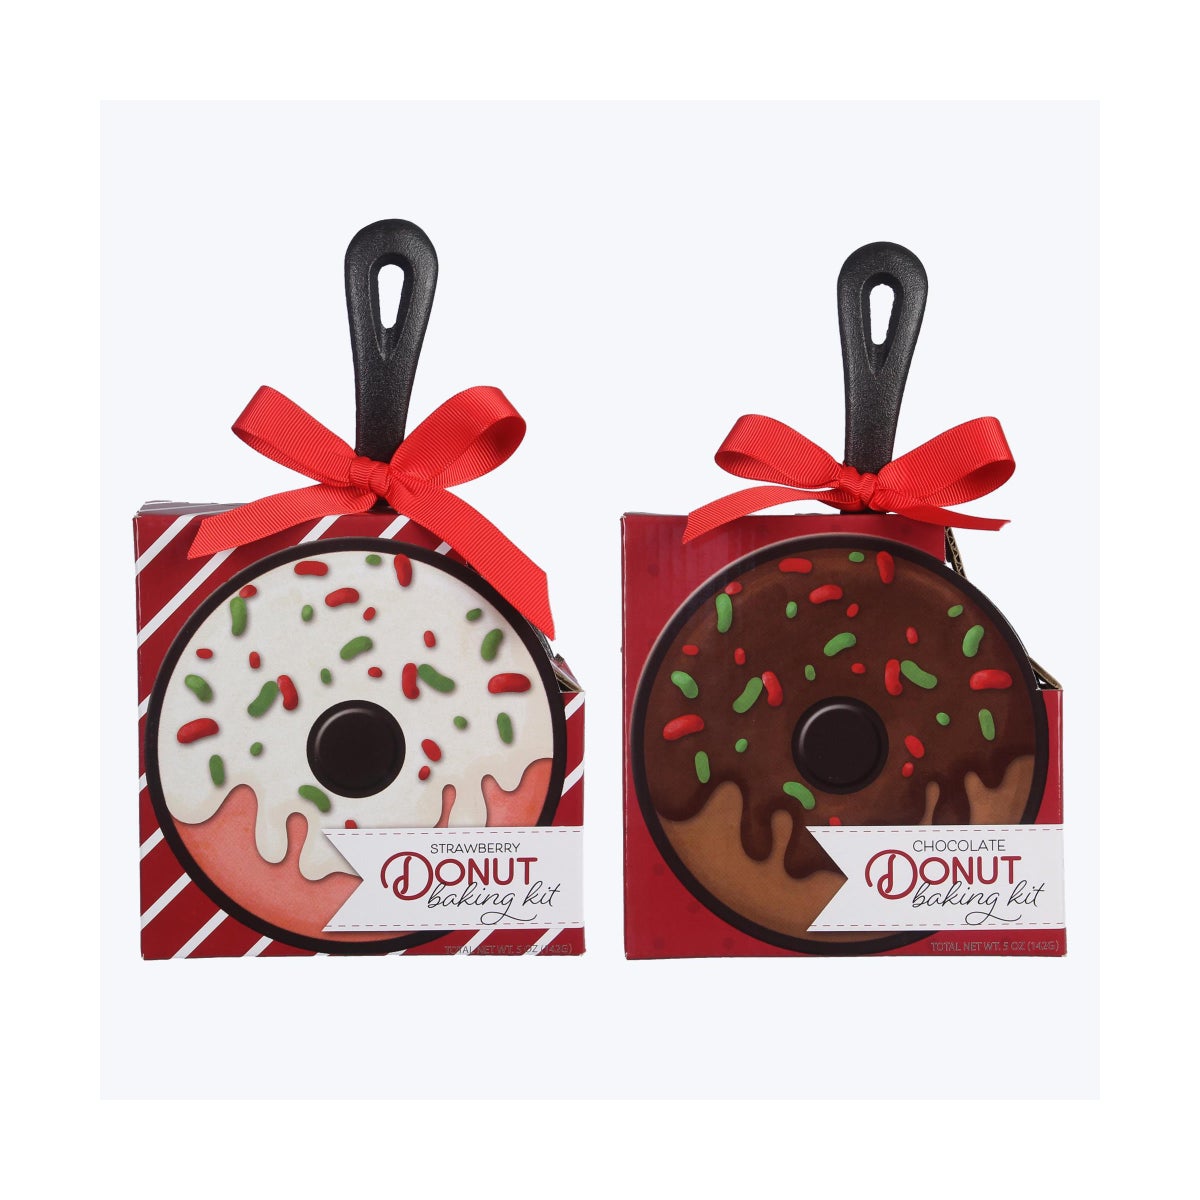 Cast Iron Skillet with Chocolate/Strawberry Donut Baking Mix set. 2 Assorted